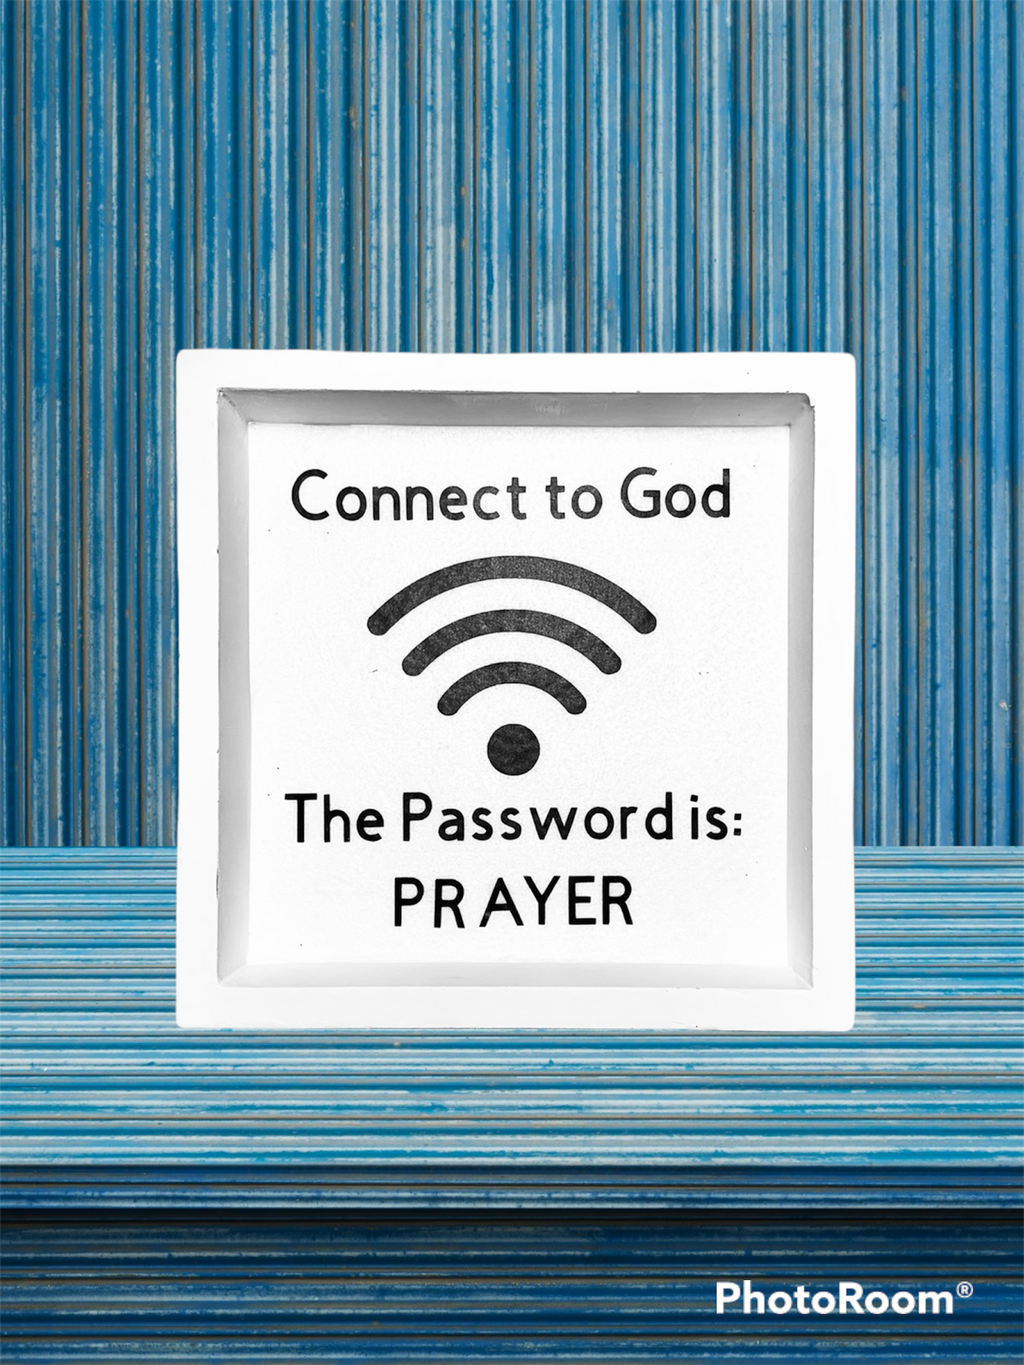 Connect to God sign